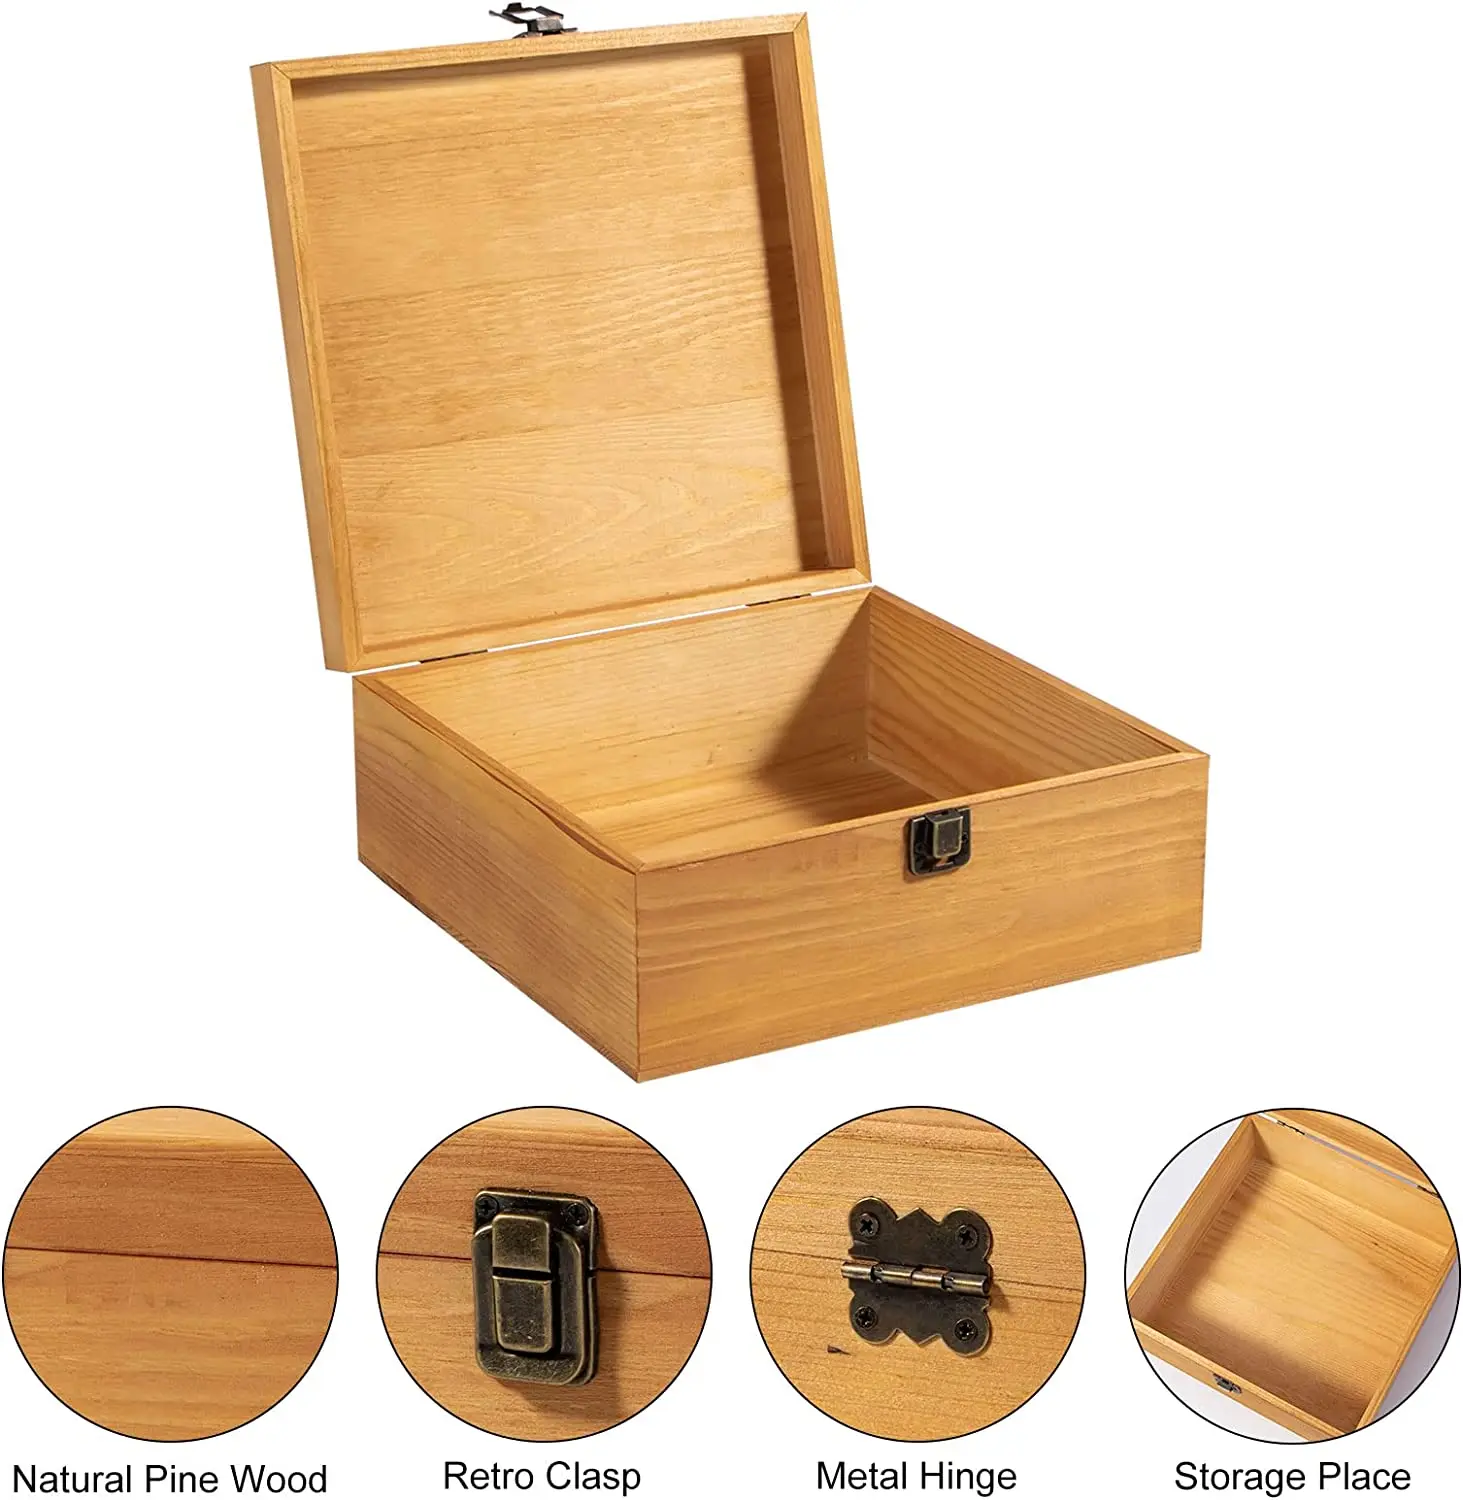 Square wooden storage crates pine wood souvenir box with durable hinged lid and lock memory box DIY painted wooden storage box